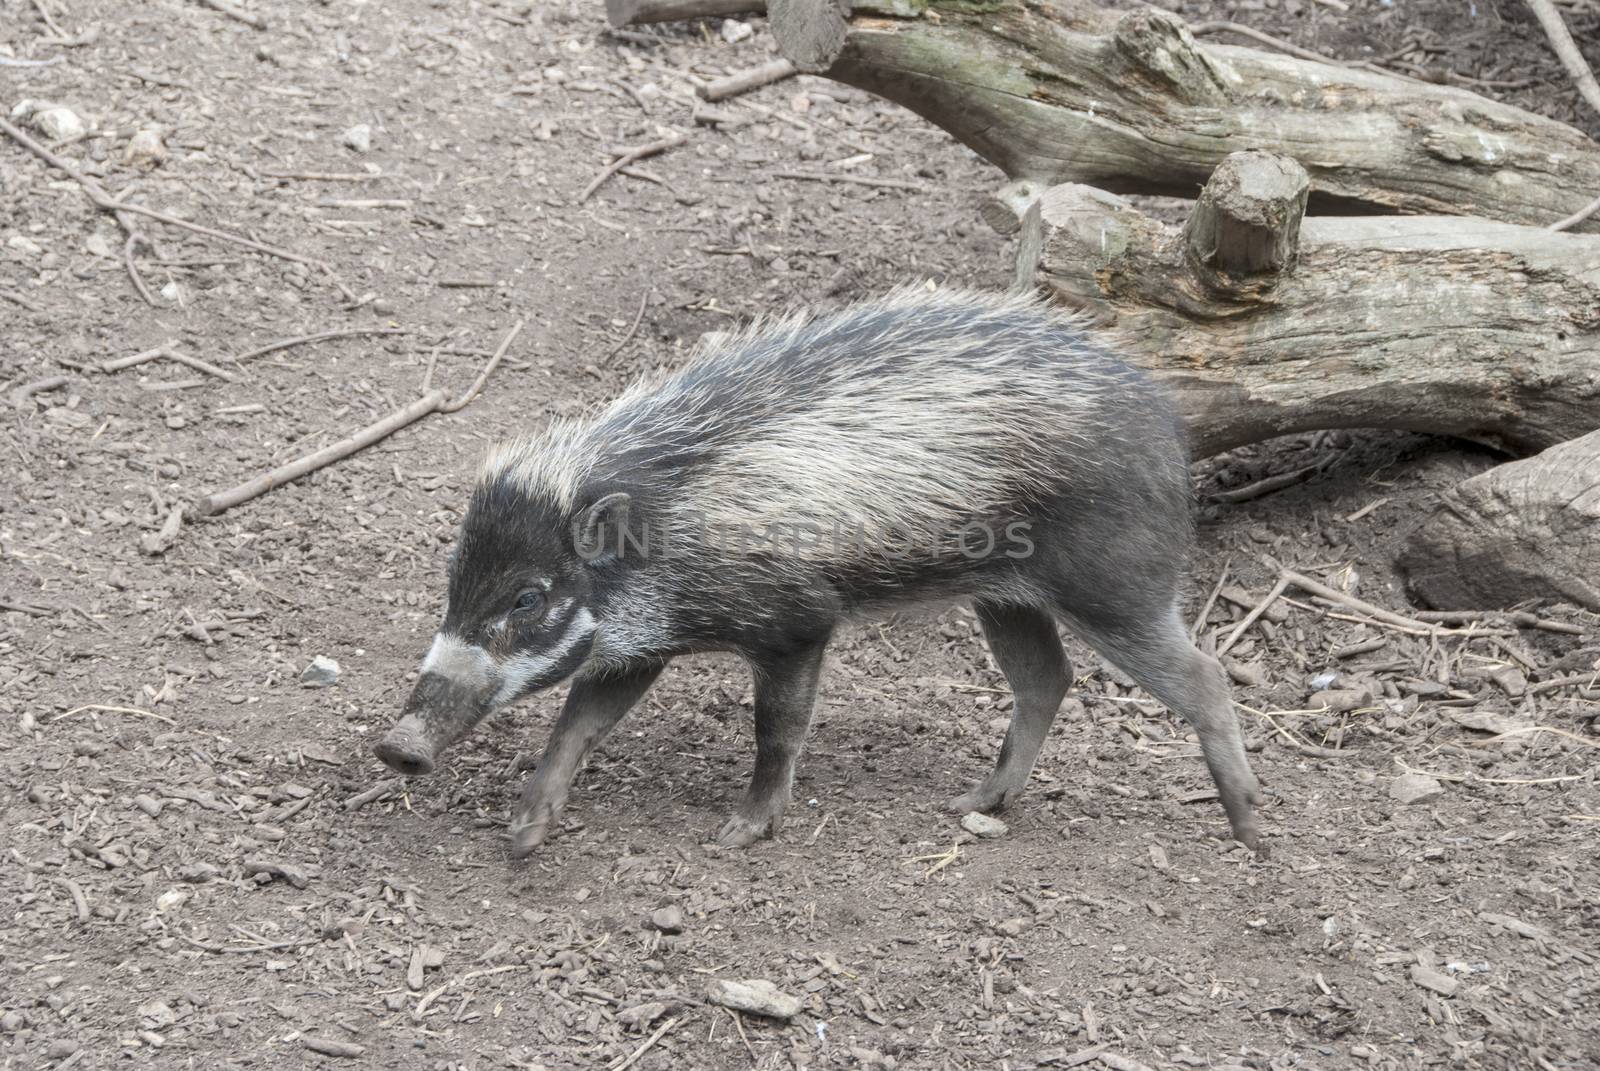 Visayan Warty Pig by d40xboy